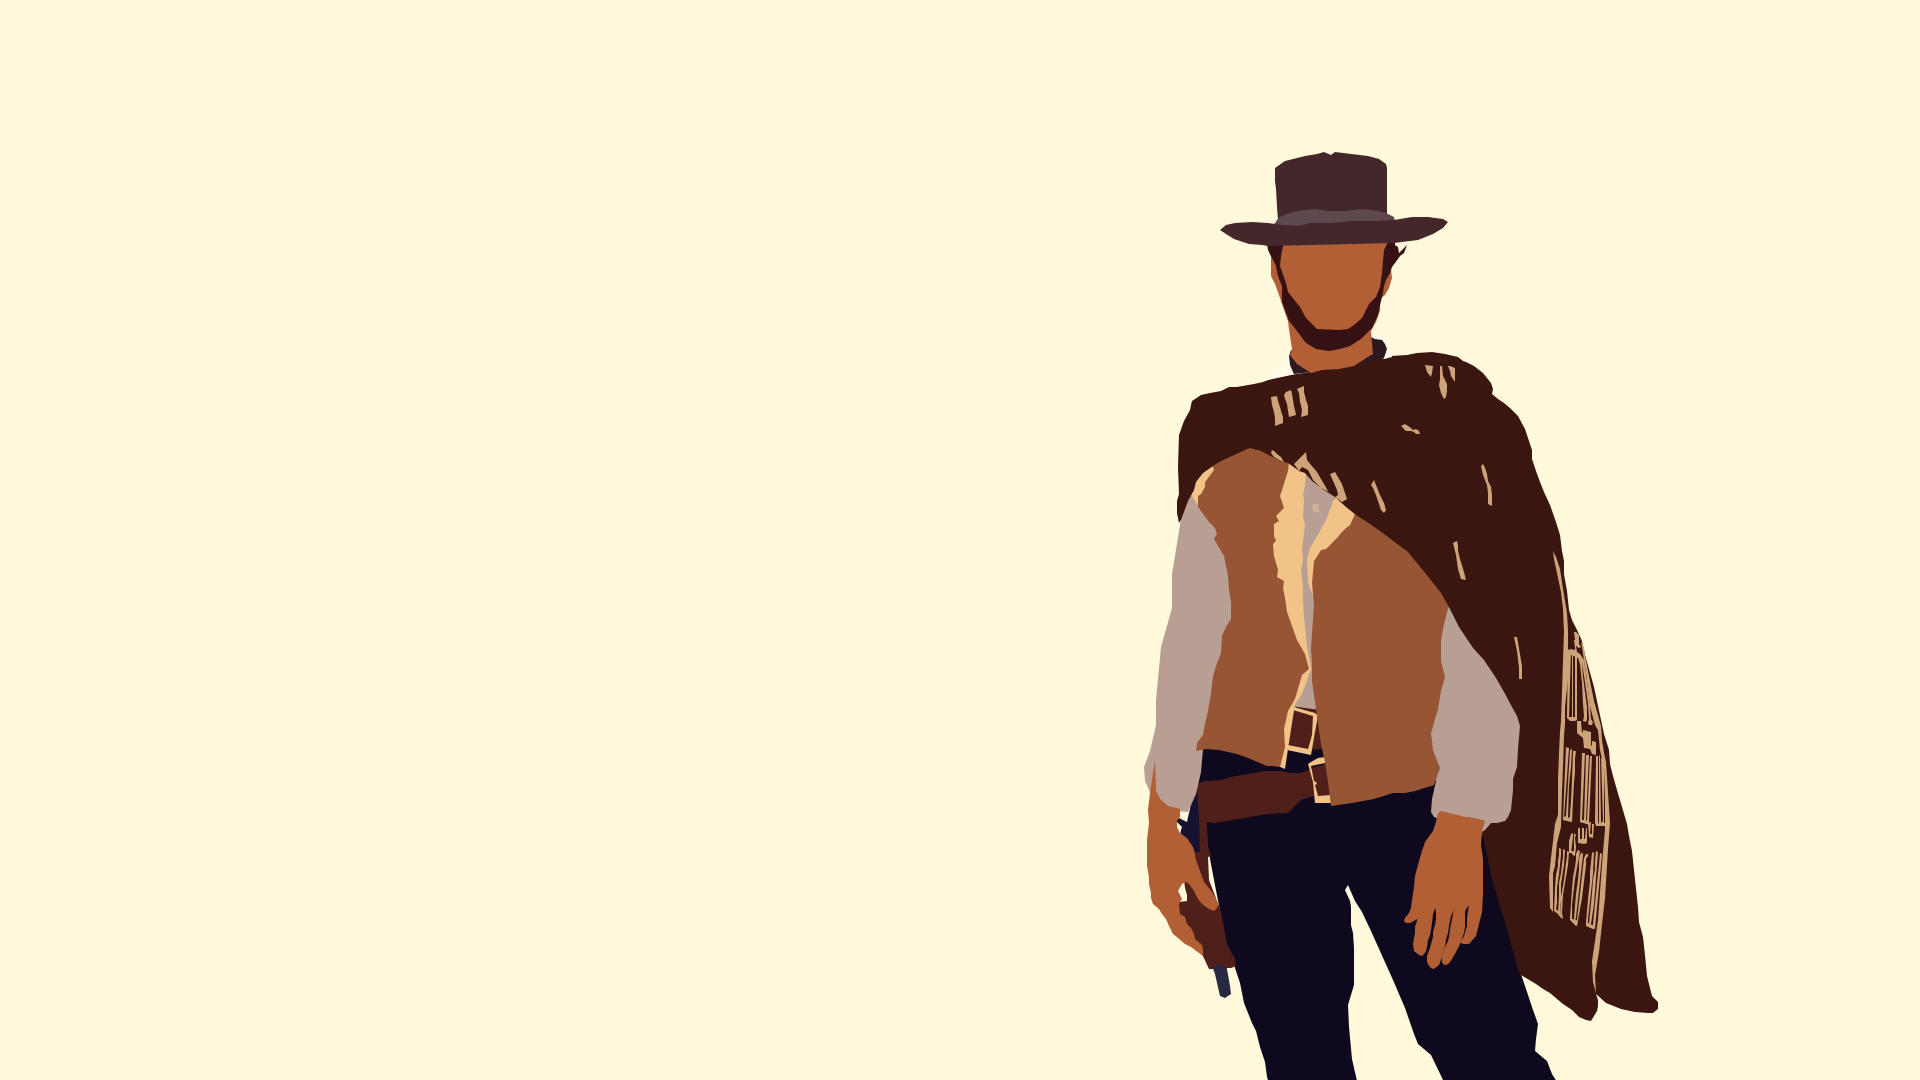 The Good The Bad And The Ugly 1920x1080